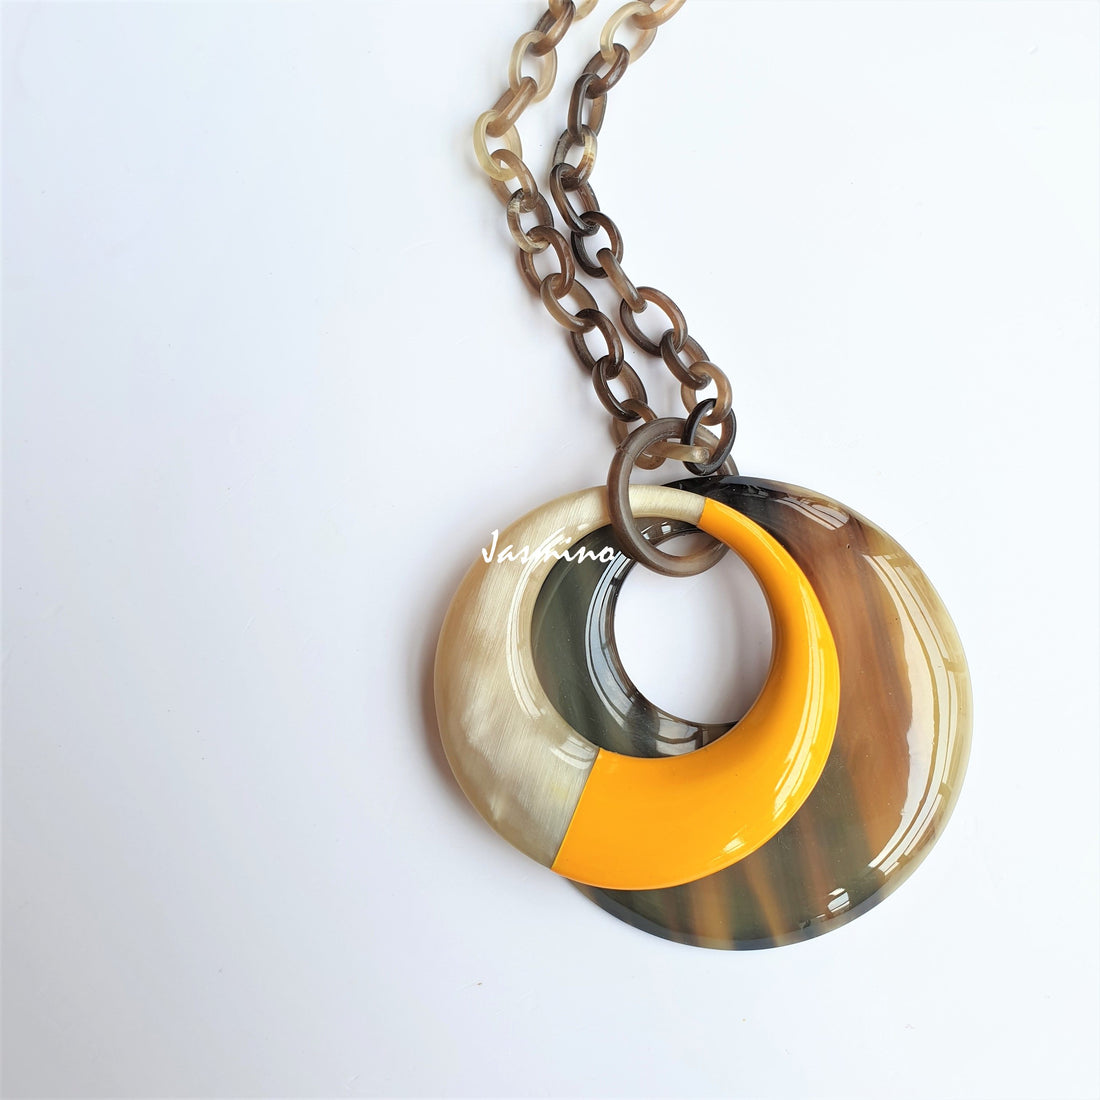 Unique handmade double circle pendant features brown and yellow made of natural buffalo horn